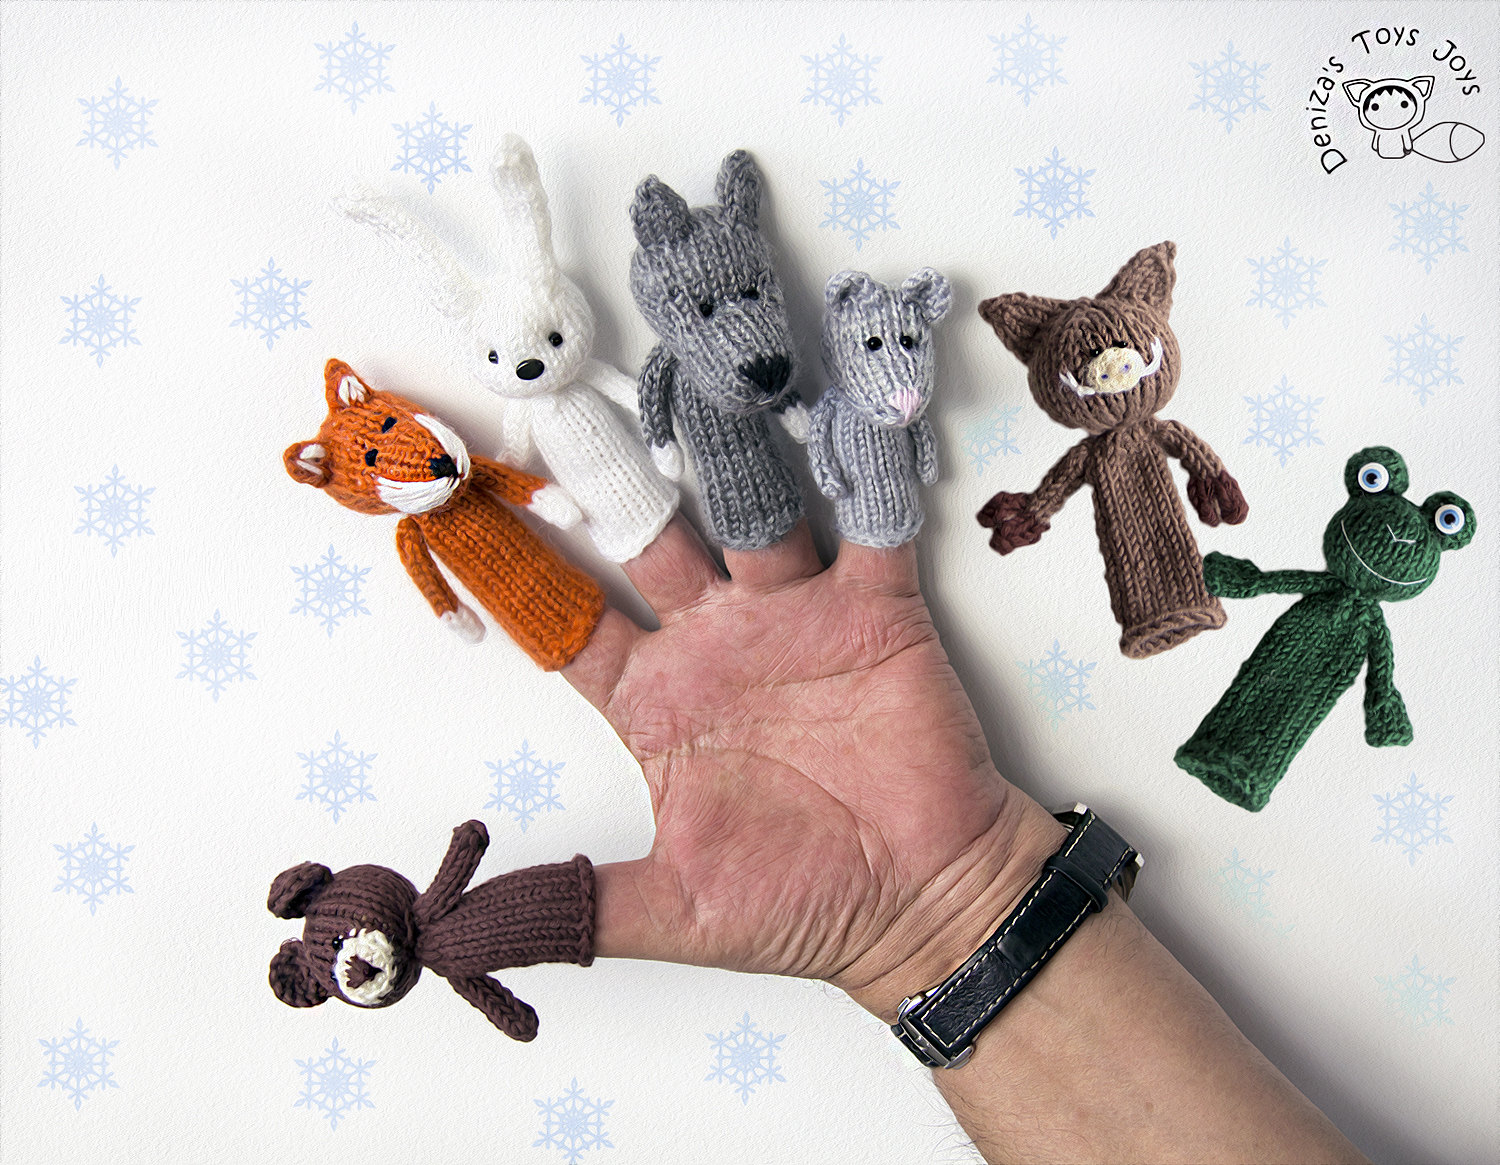 Knitting Patterns For Finger Puppets Finger Puppets Set Of 7 Knitting Patterns Knitted In The Round Fox Mouse Bear Boar Wolf Hare Frog Puppets